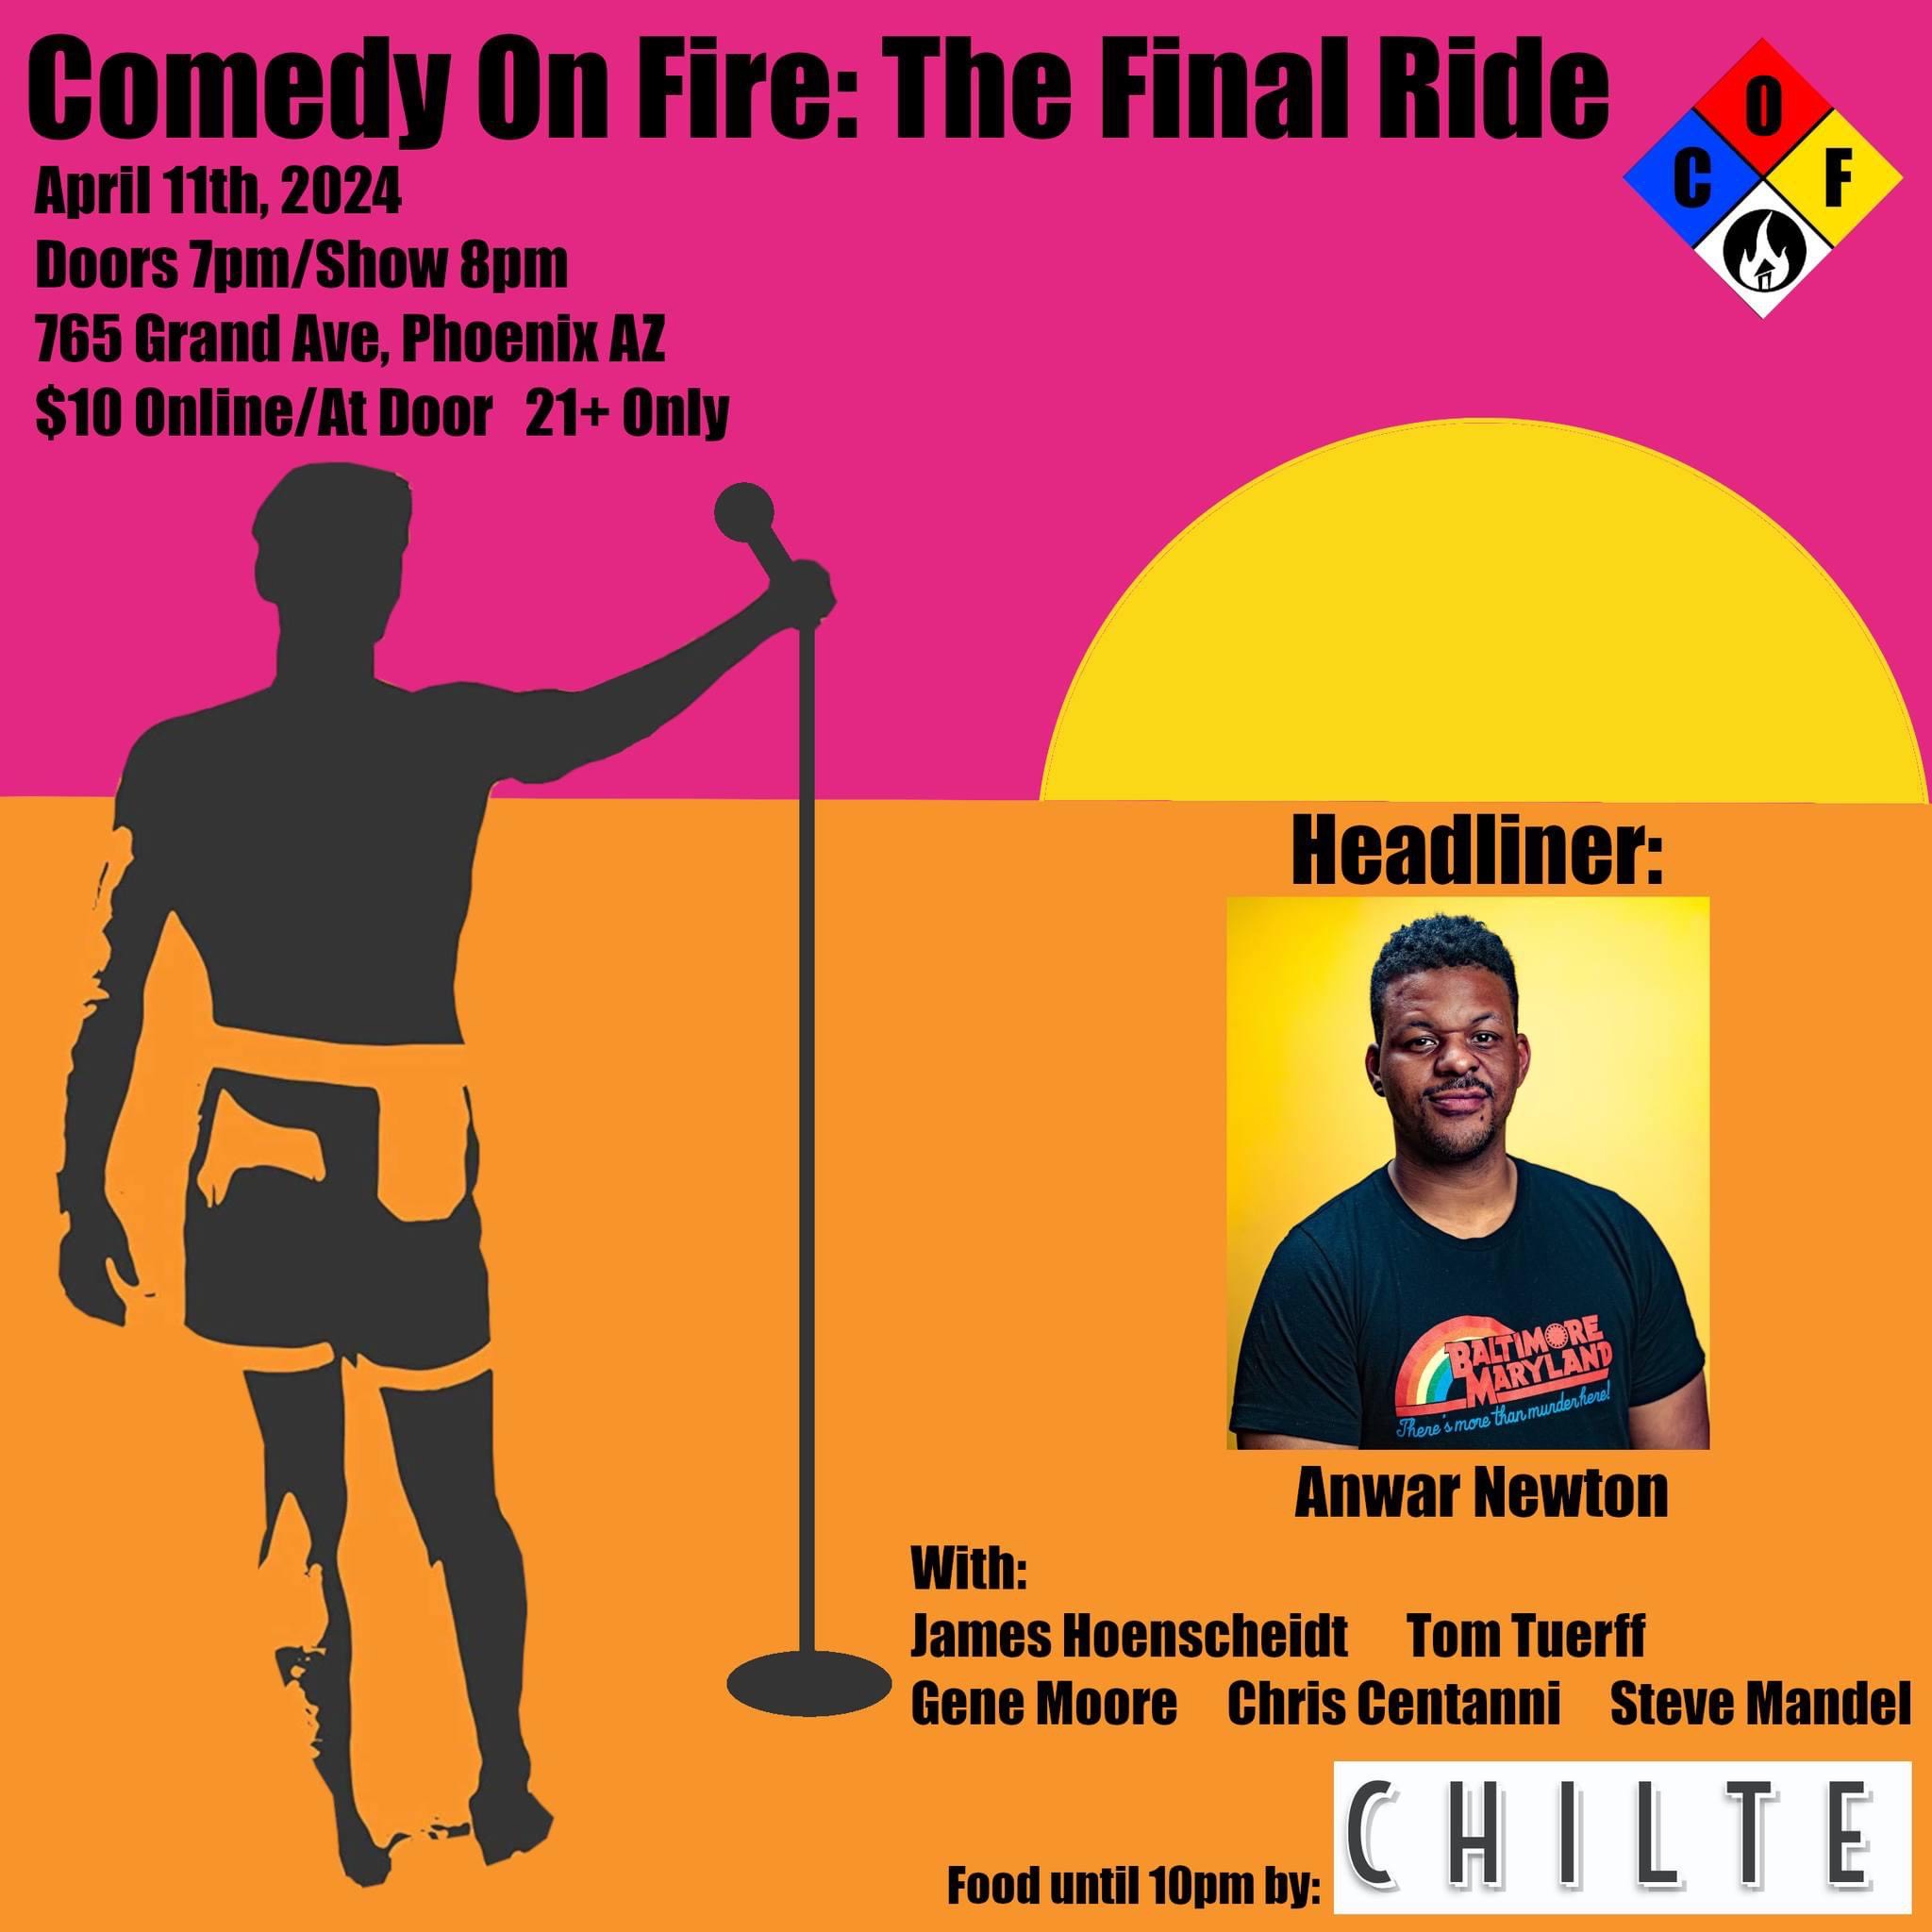 Comedy On Fire: The Final Ride